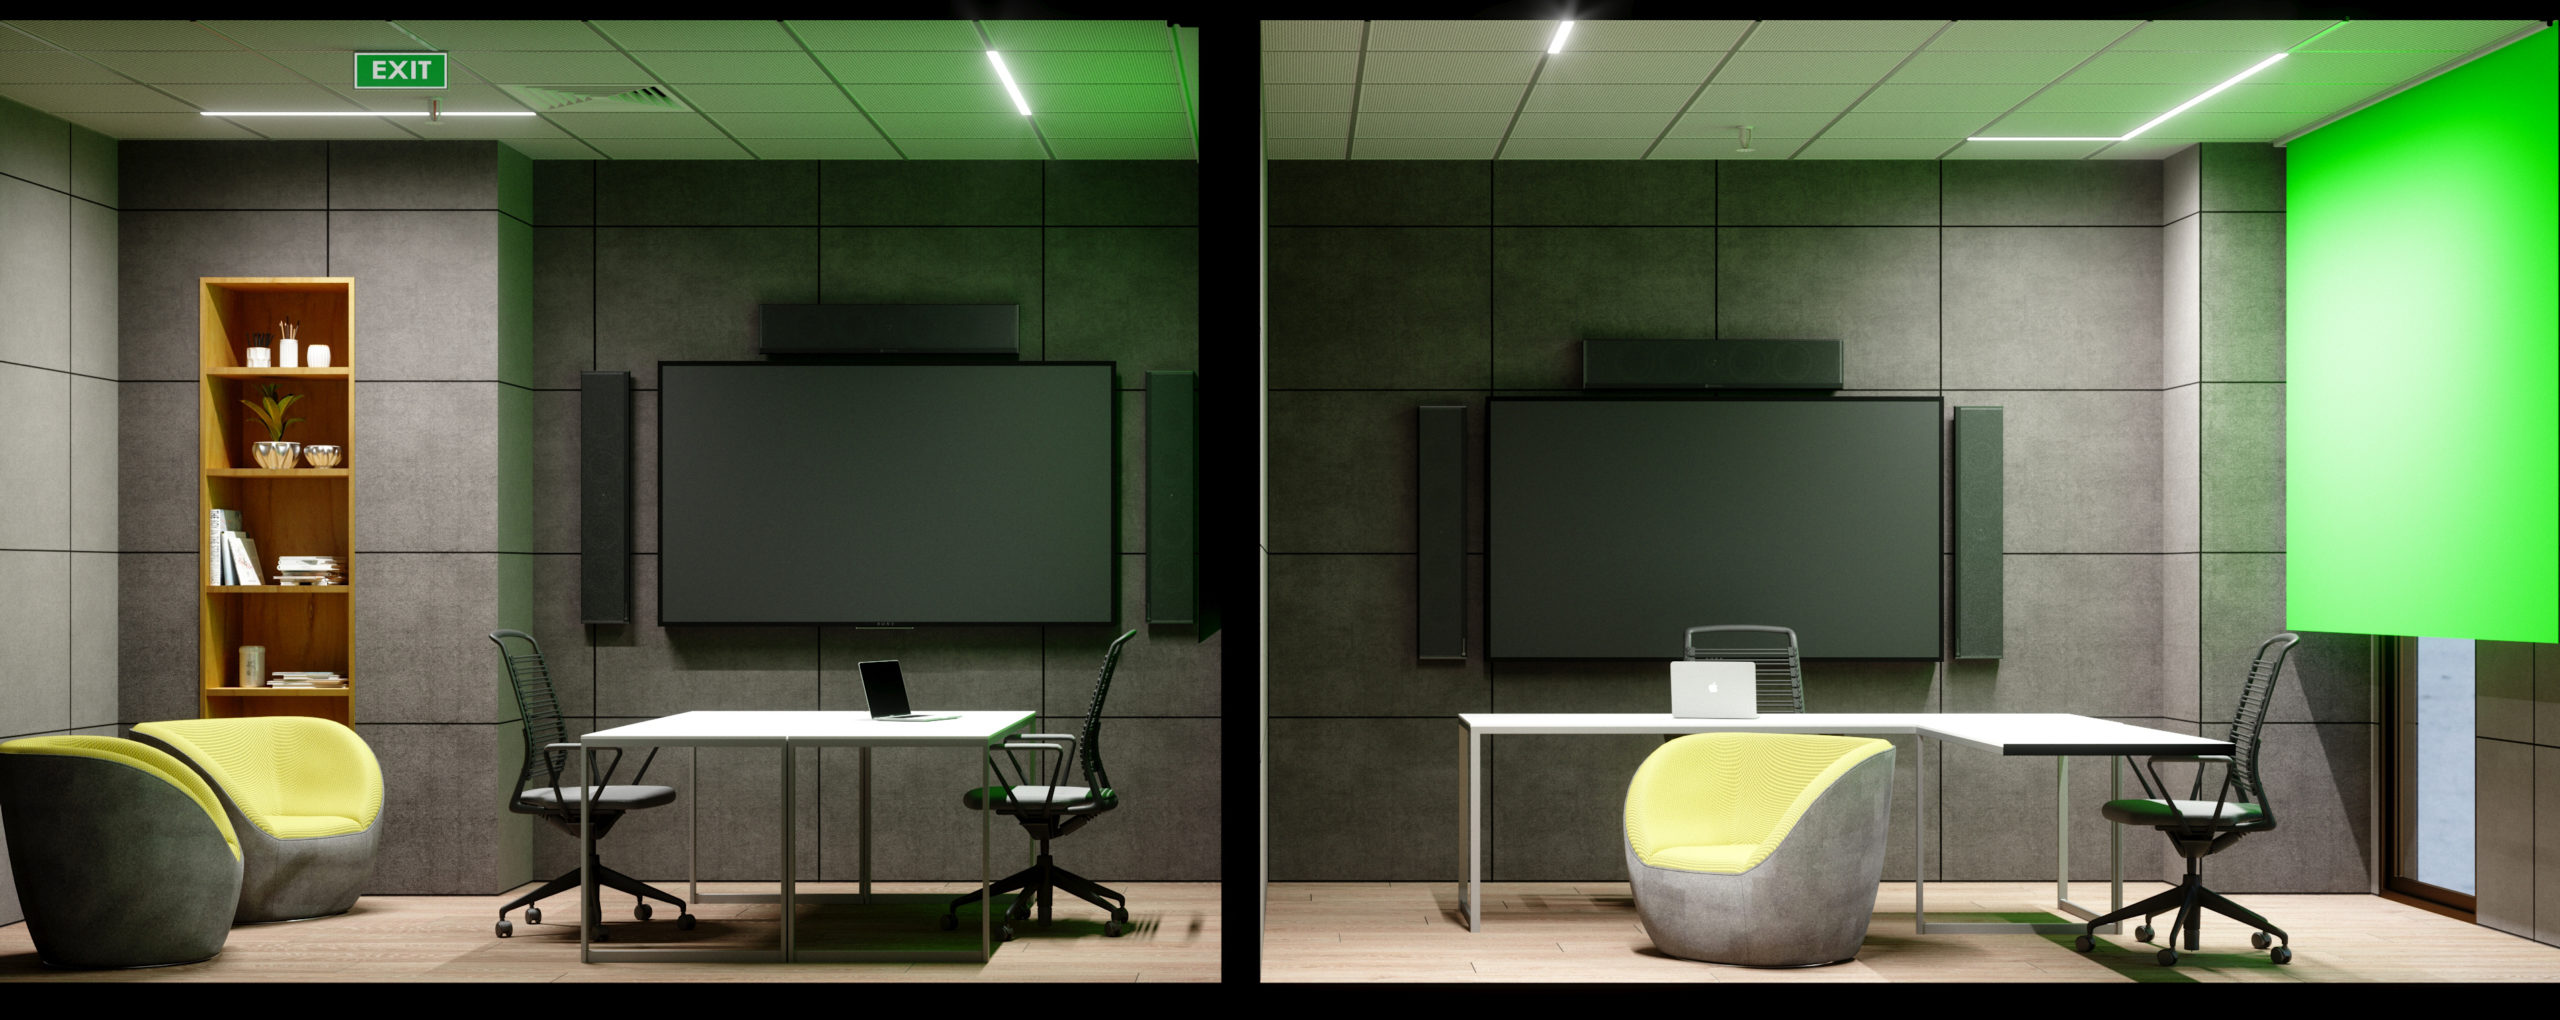 meeting rooms with green screens, tvs for presentations, seating, and desks